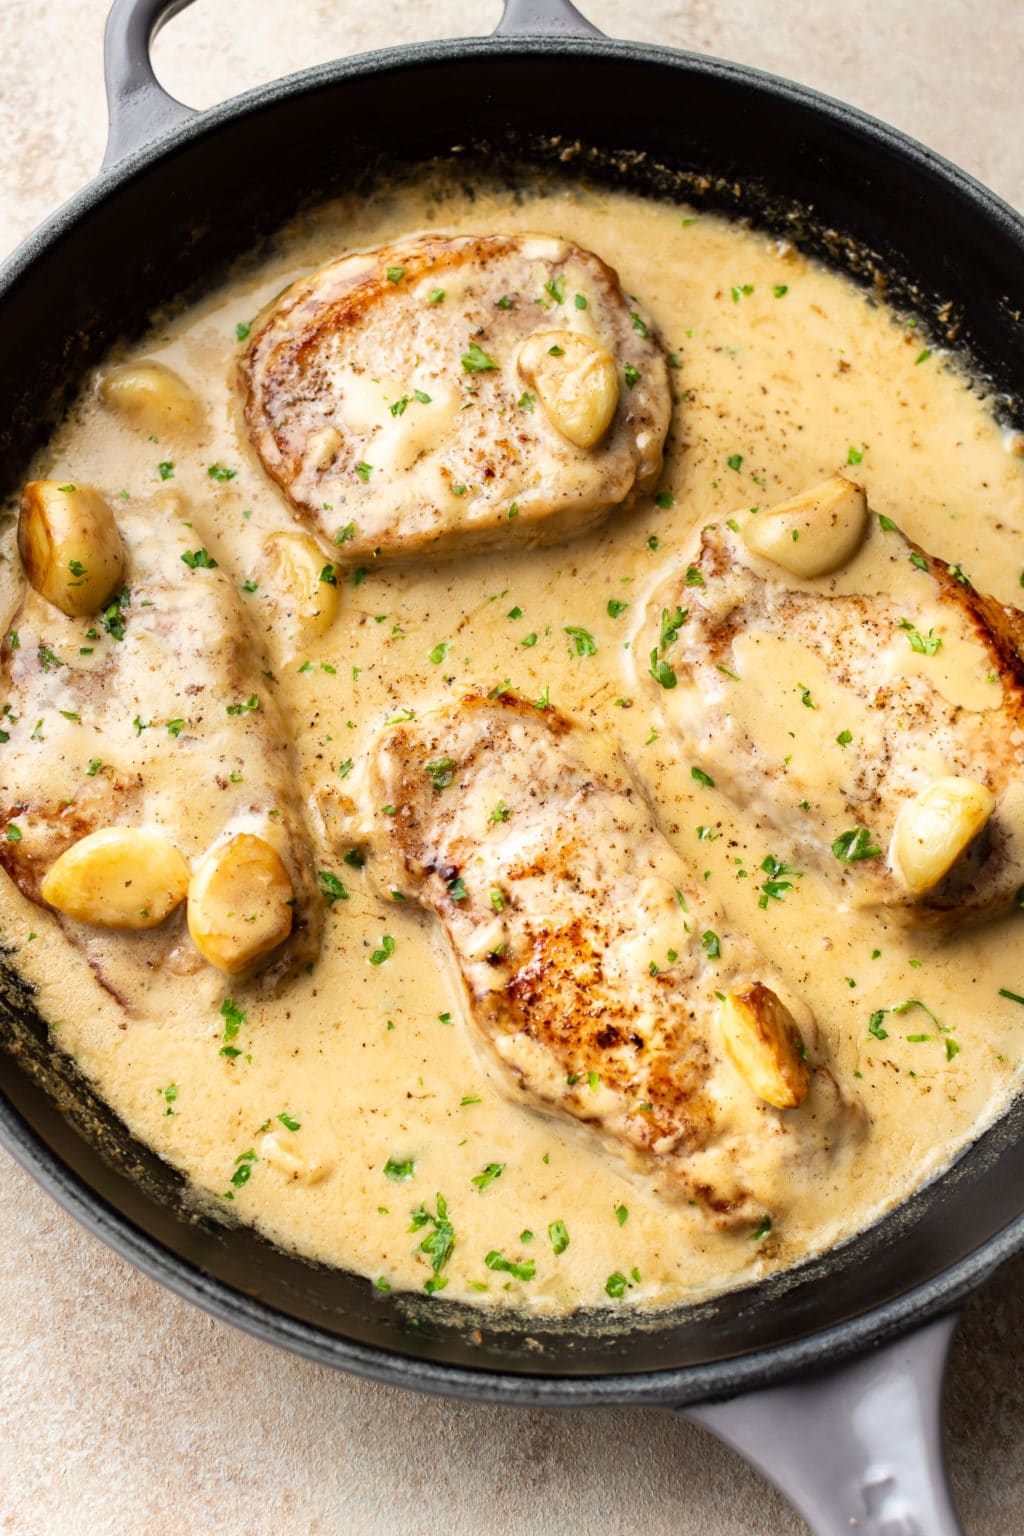 Pork chops with garlic and cream sauce in a cast iron pan.